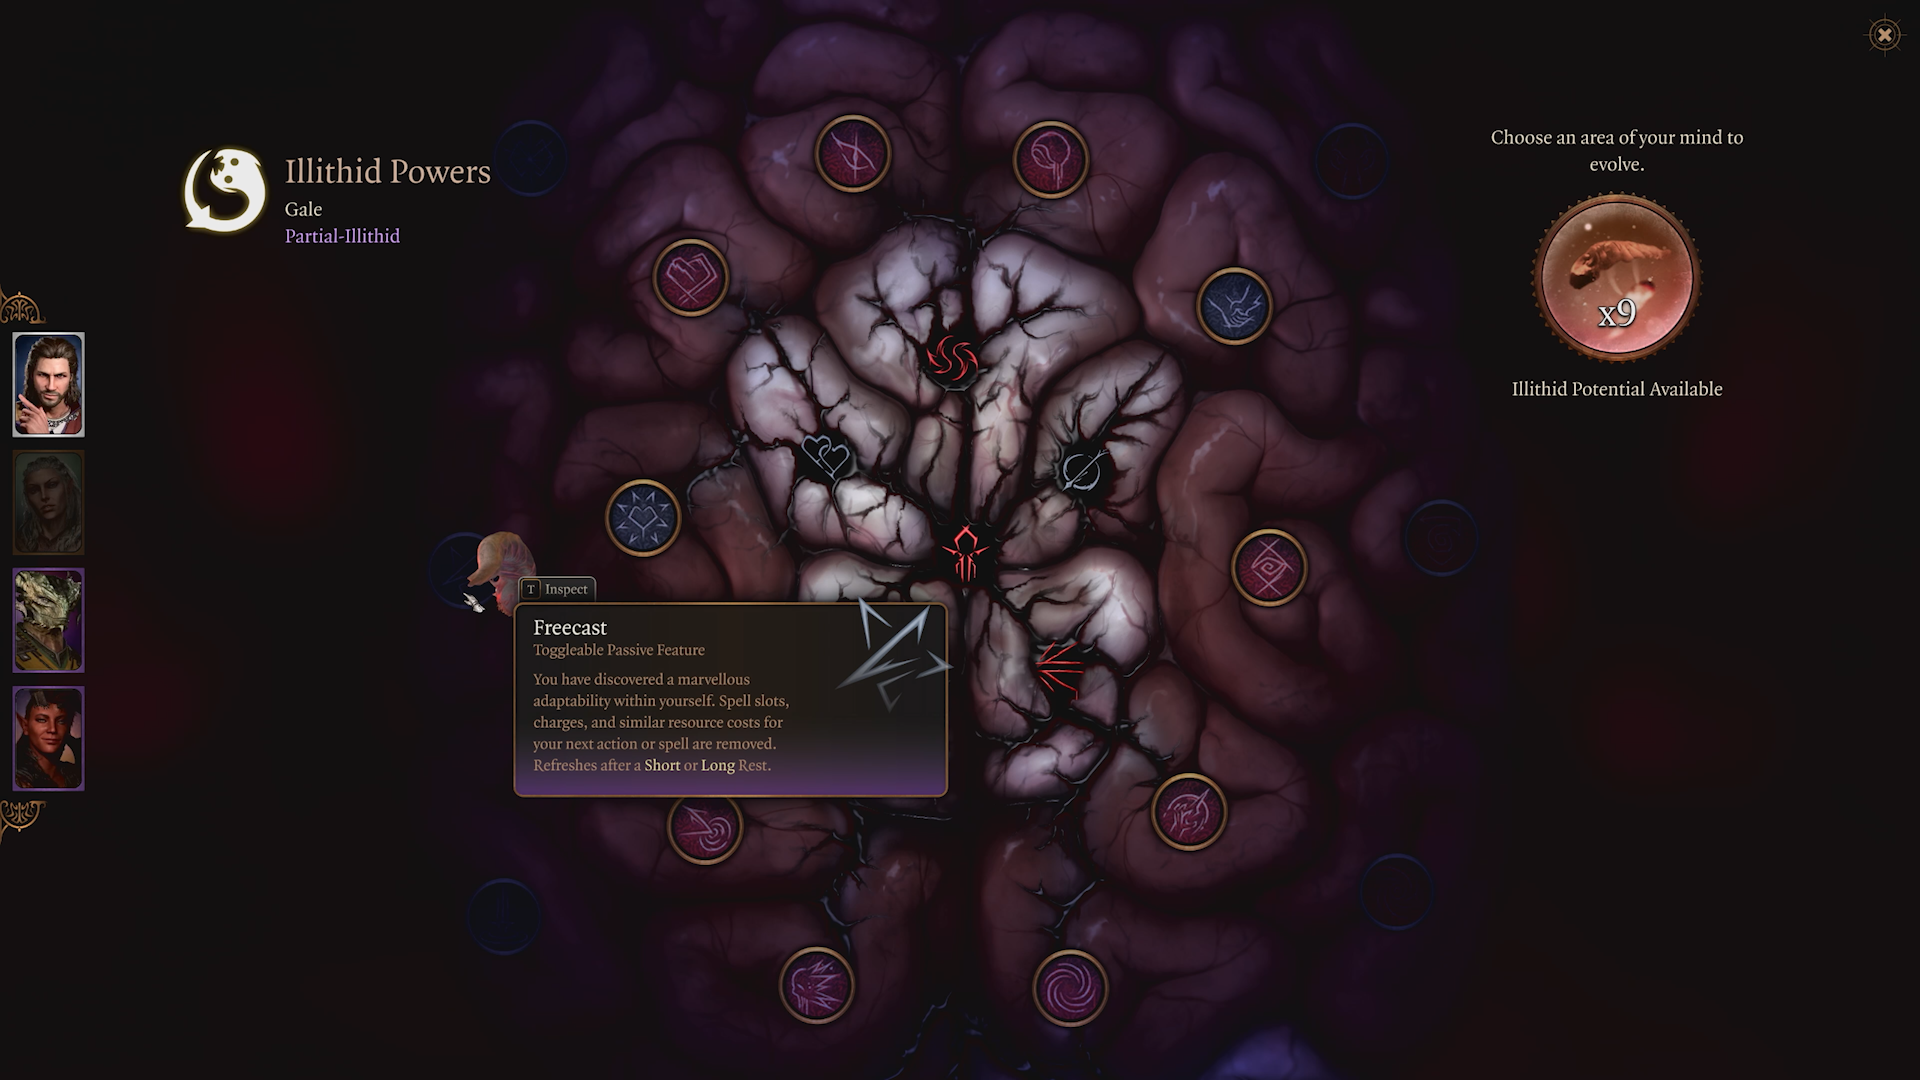 An overview of the Illithid Powers in-game in Baldur's Gate 3